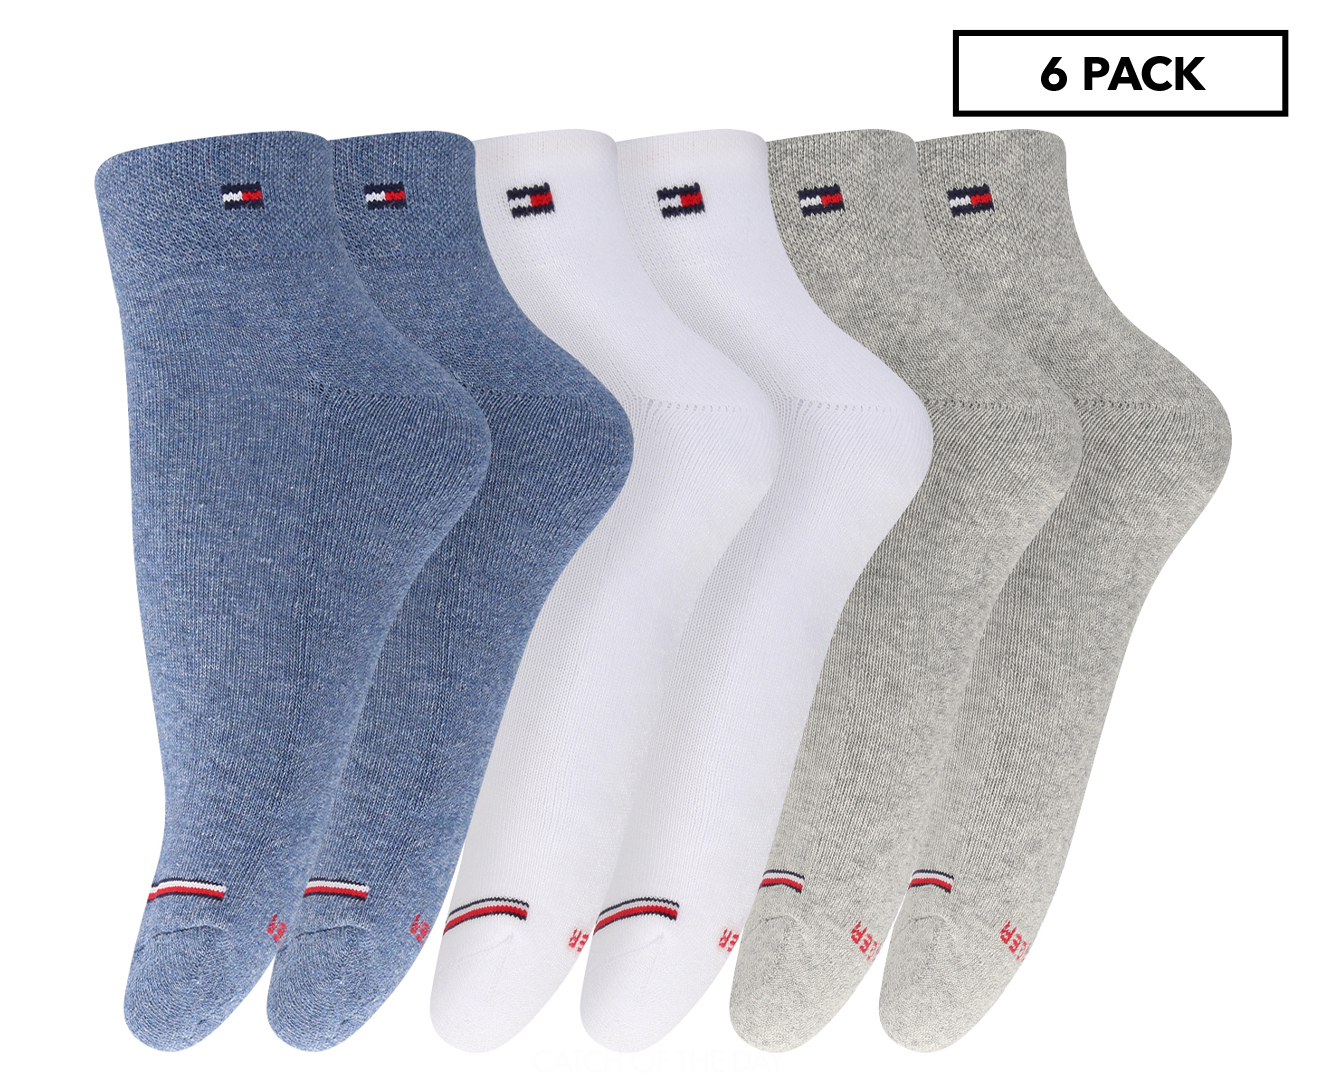 Tommy Hilfiger Women's Cushioned Sole Quarter Socks 6-Pack - Assorted ...